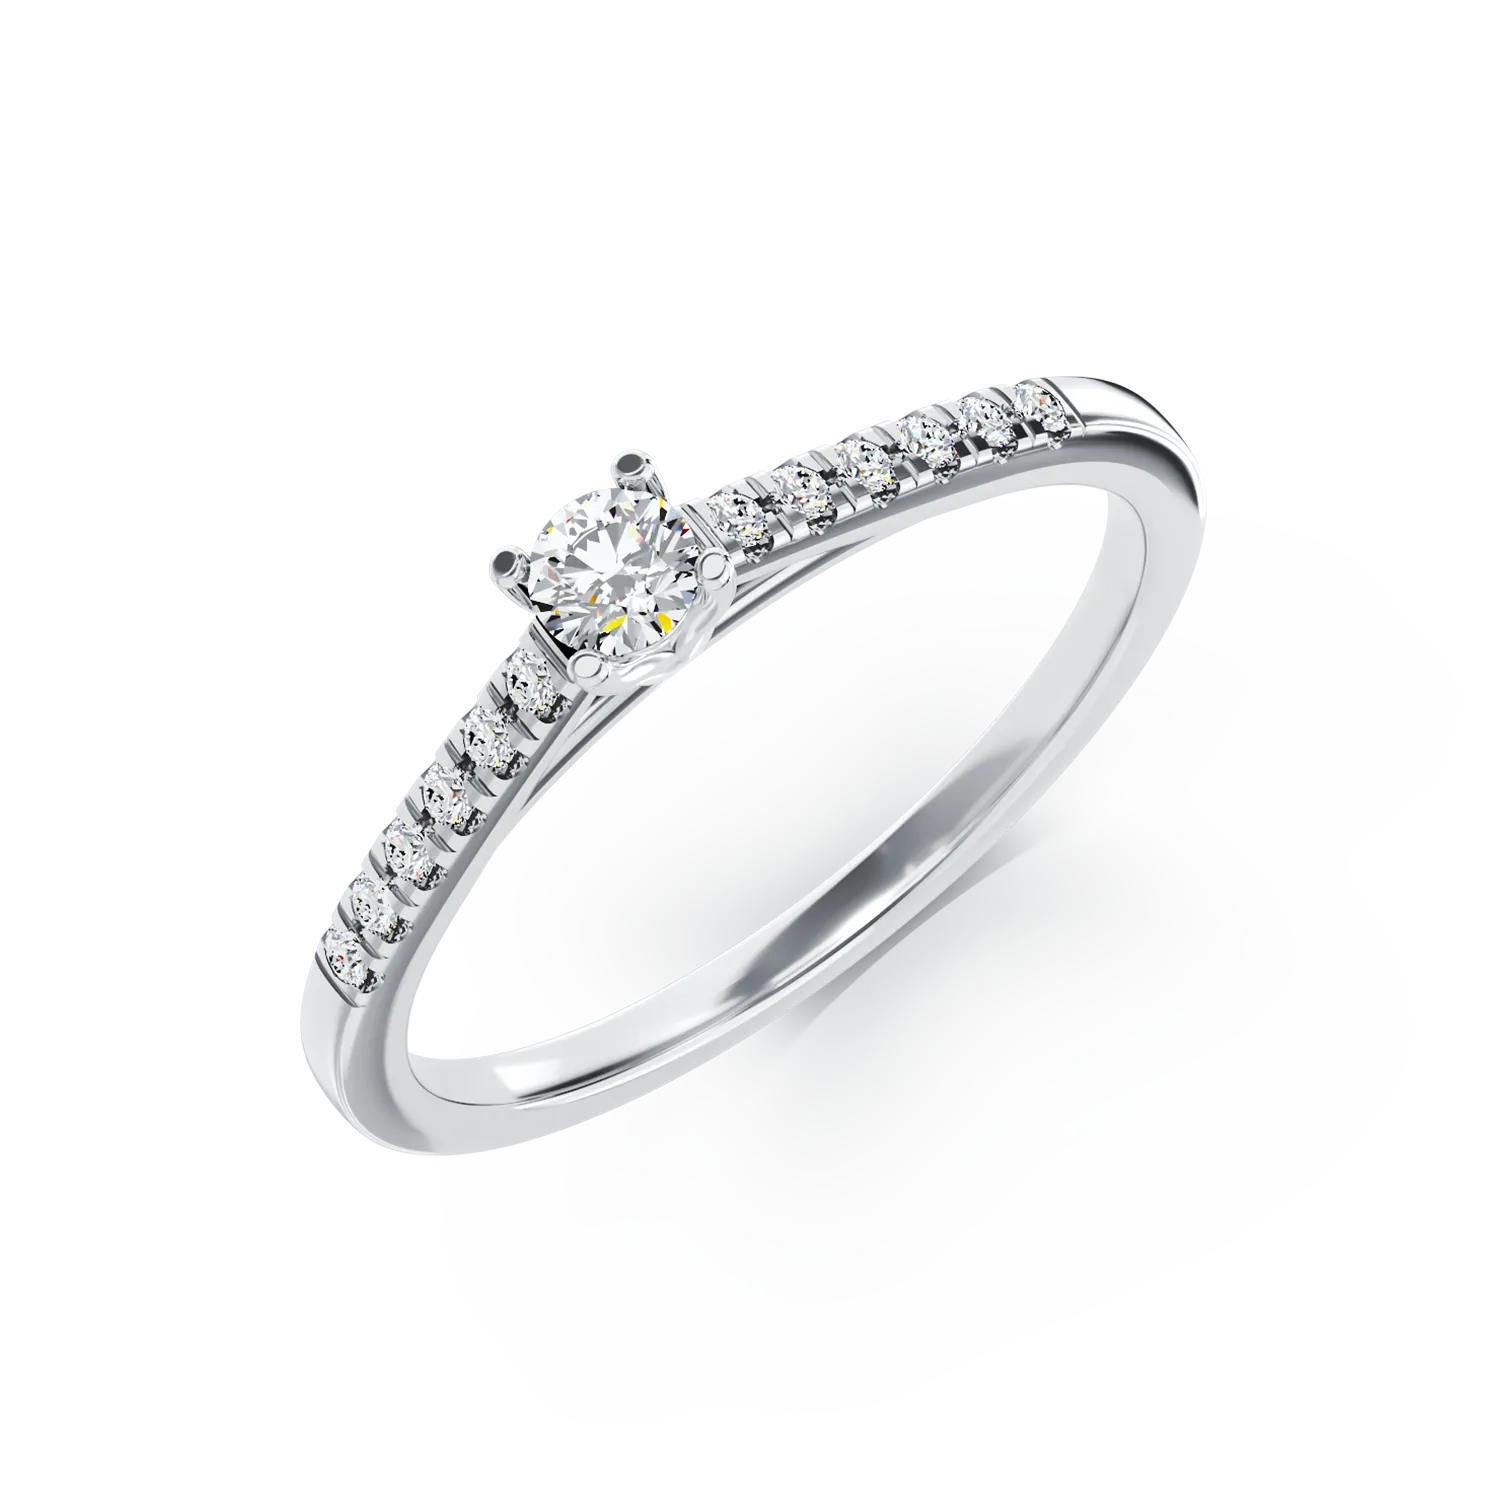 18K white gold engagement ring with 0.31ct diamond and 0.125ct diamonds